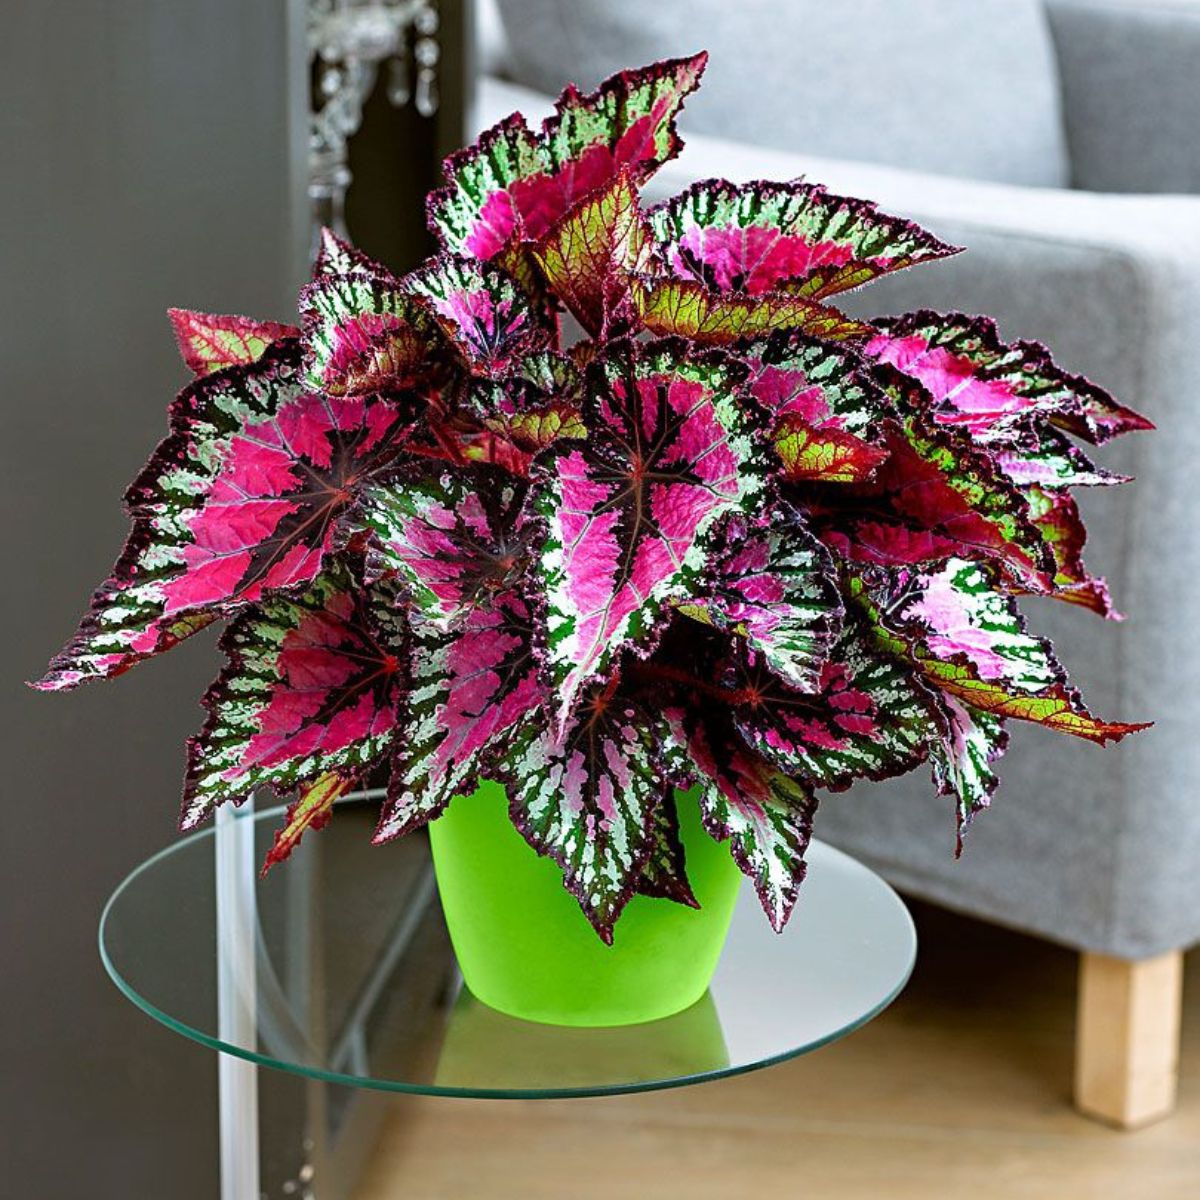 Colorful plants make a great choice for interior decorations on Thursd